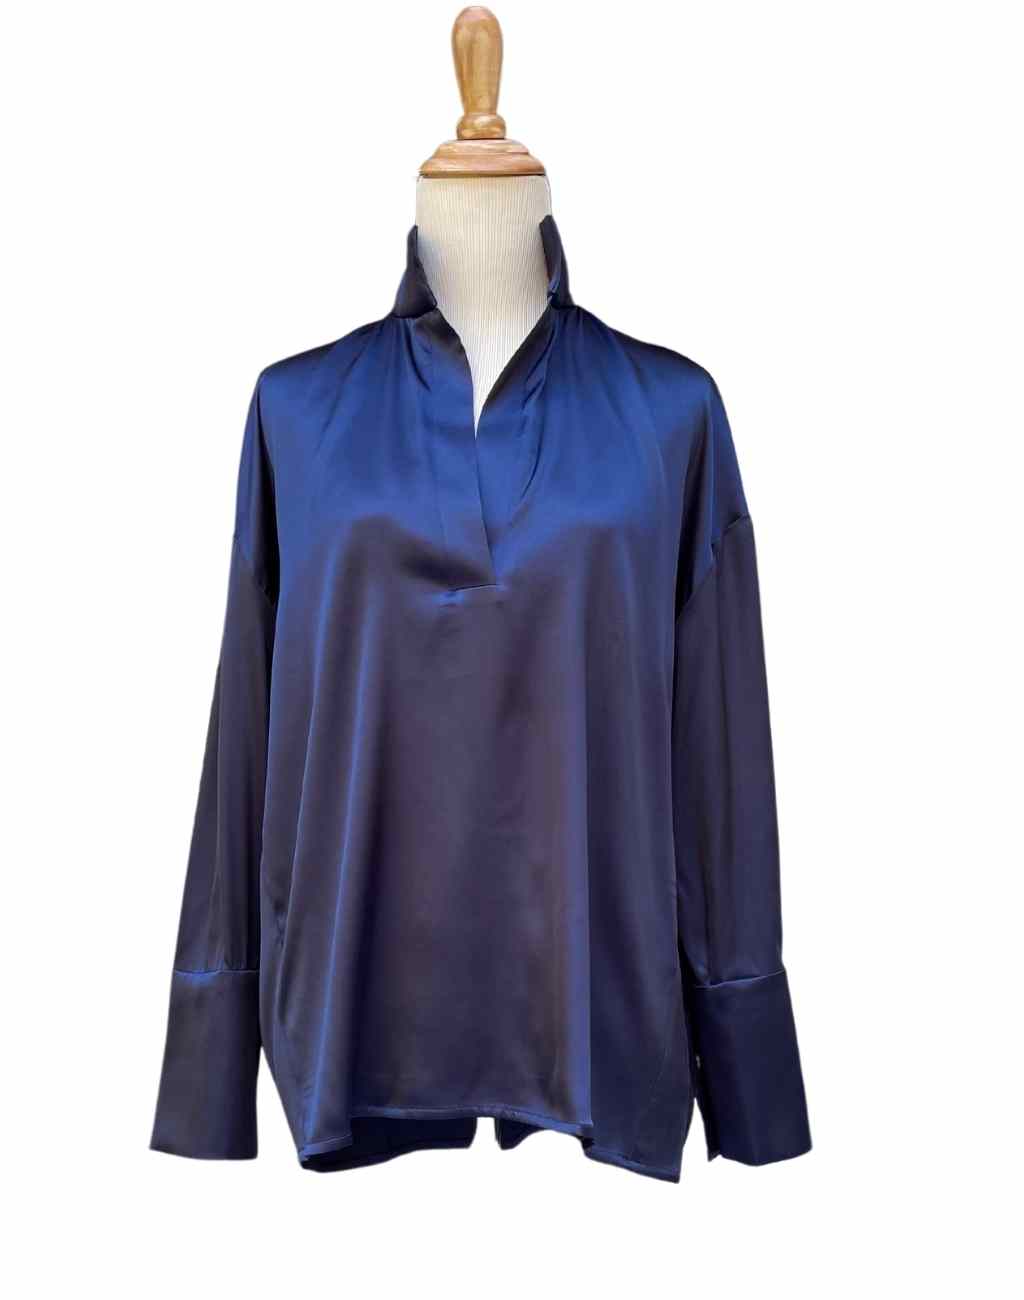 Classic Silk Long Sleeved Grace Top | V-Neck with Collar - Visit Nifty Monica Nera 